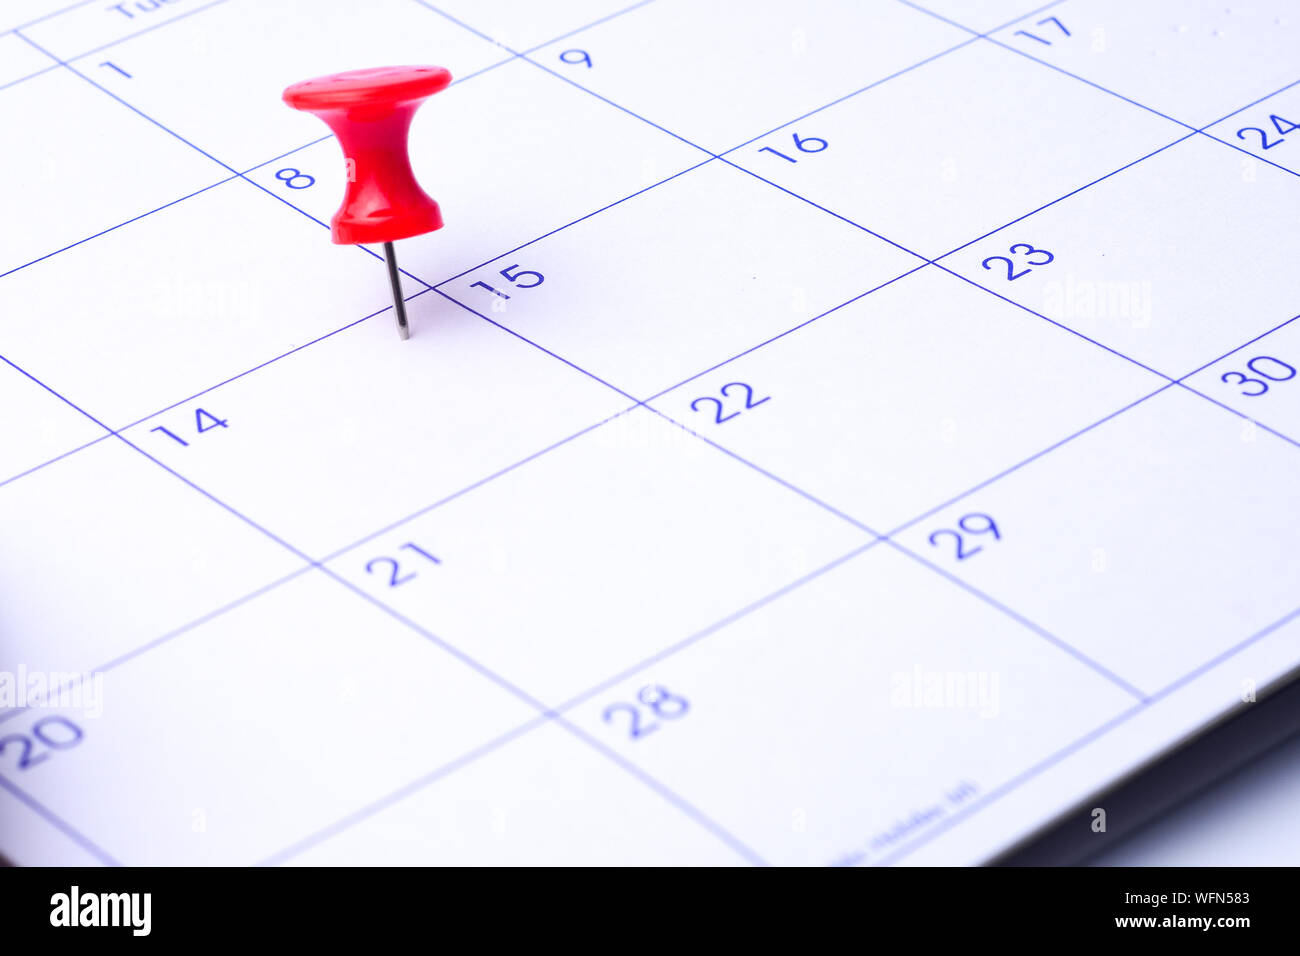 Close-up High Angle View Of Thumbtack On Calendar Date Stock Photo